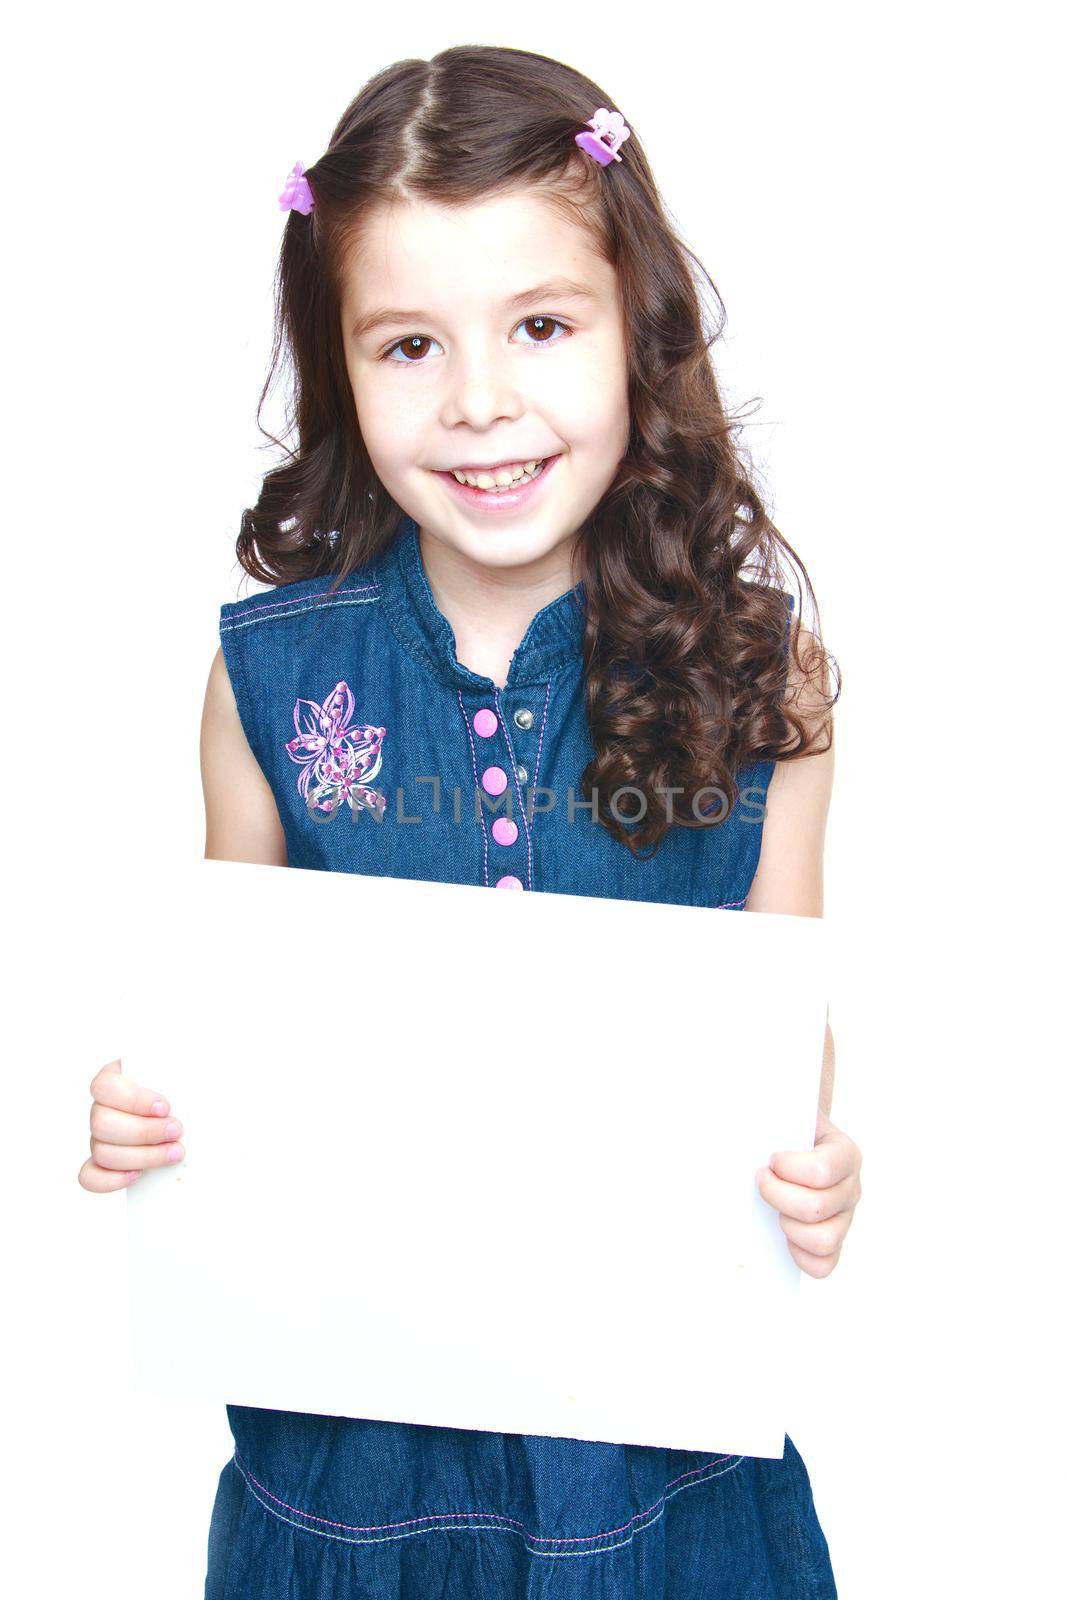 Girl in jeans dress holding a banner in front.Isolated on white background portrait.